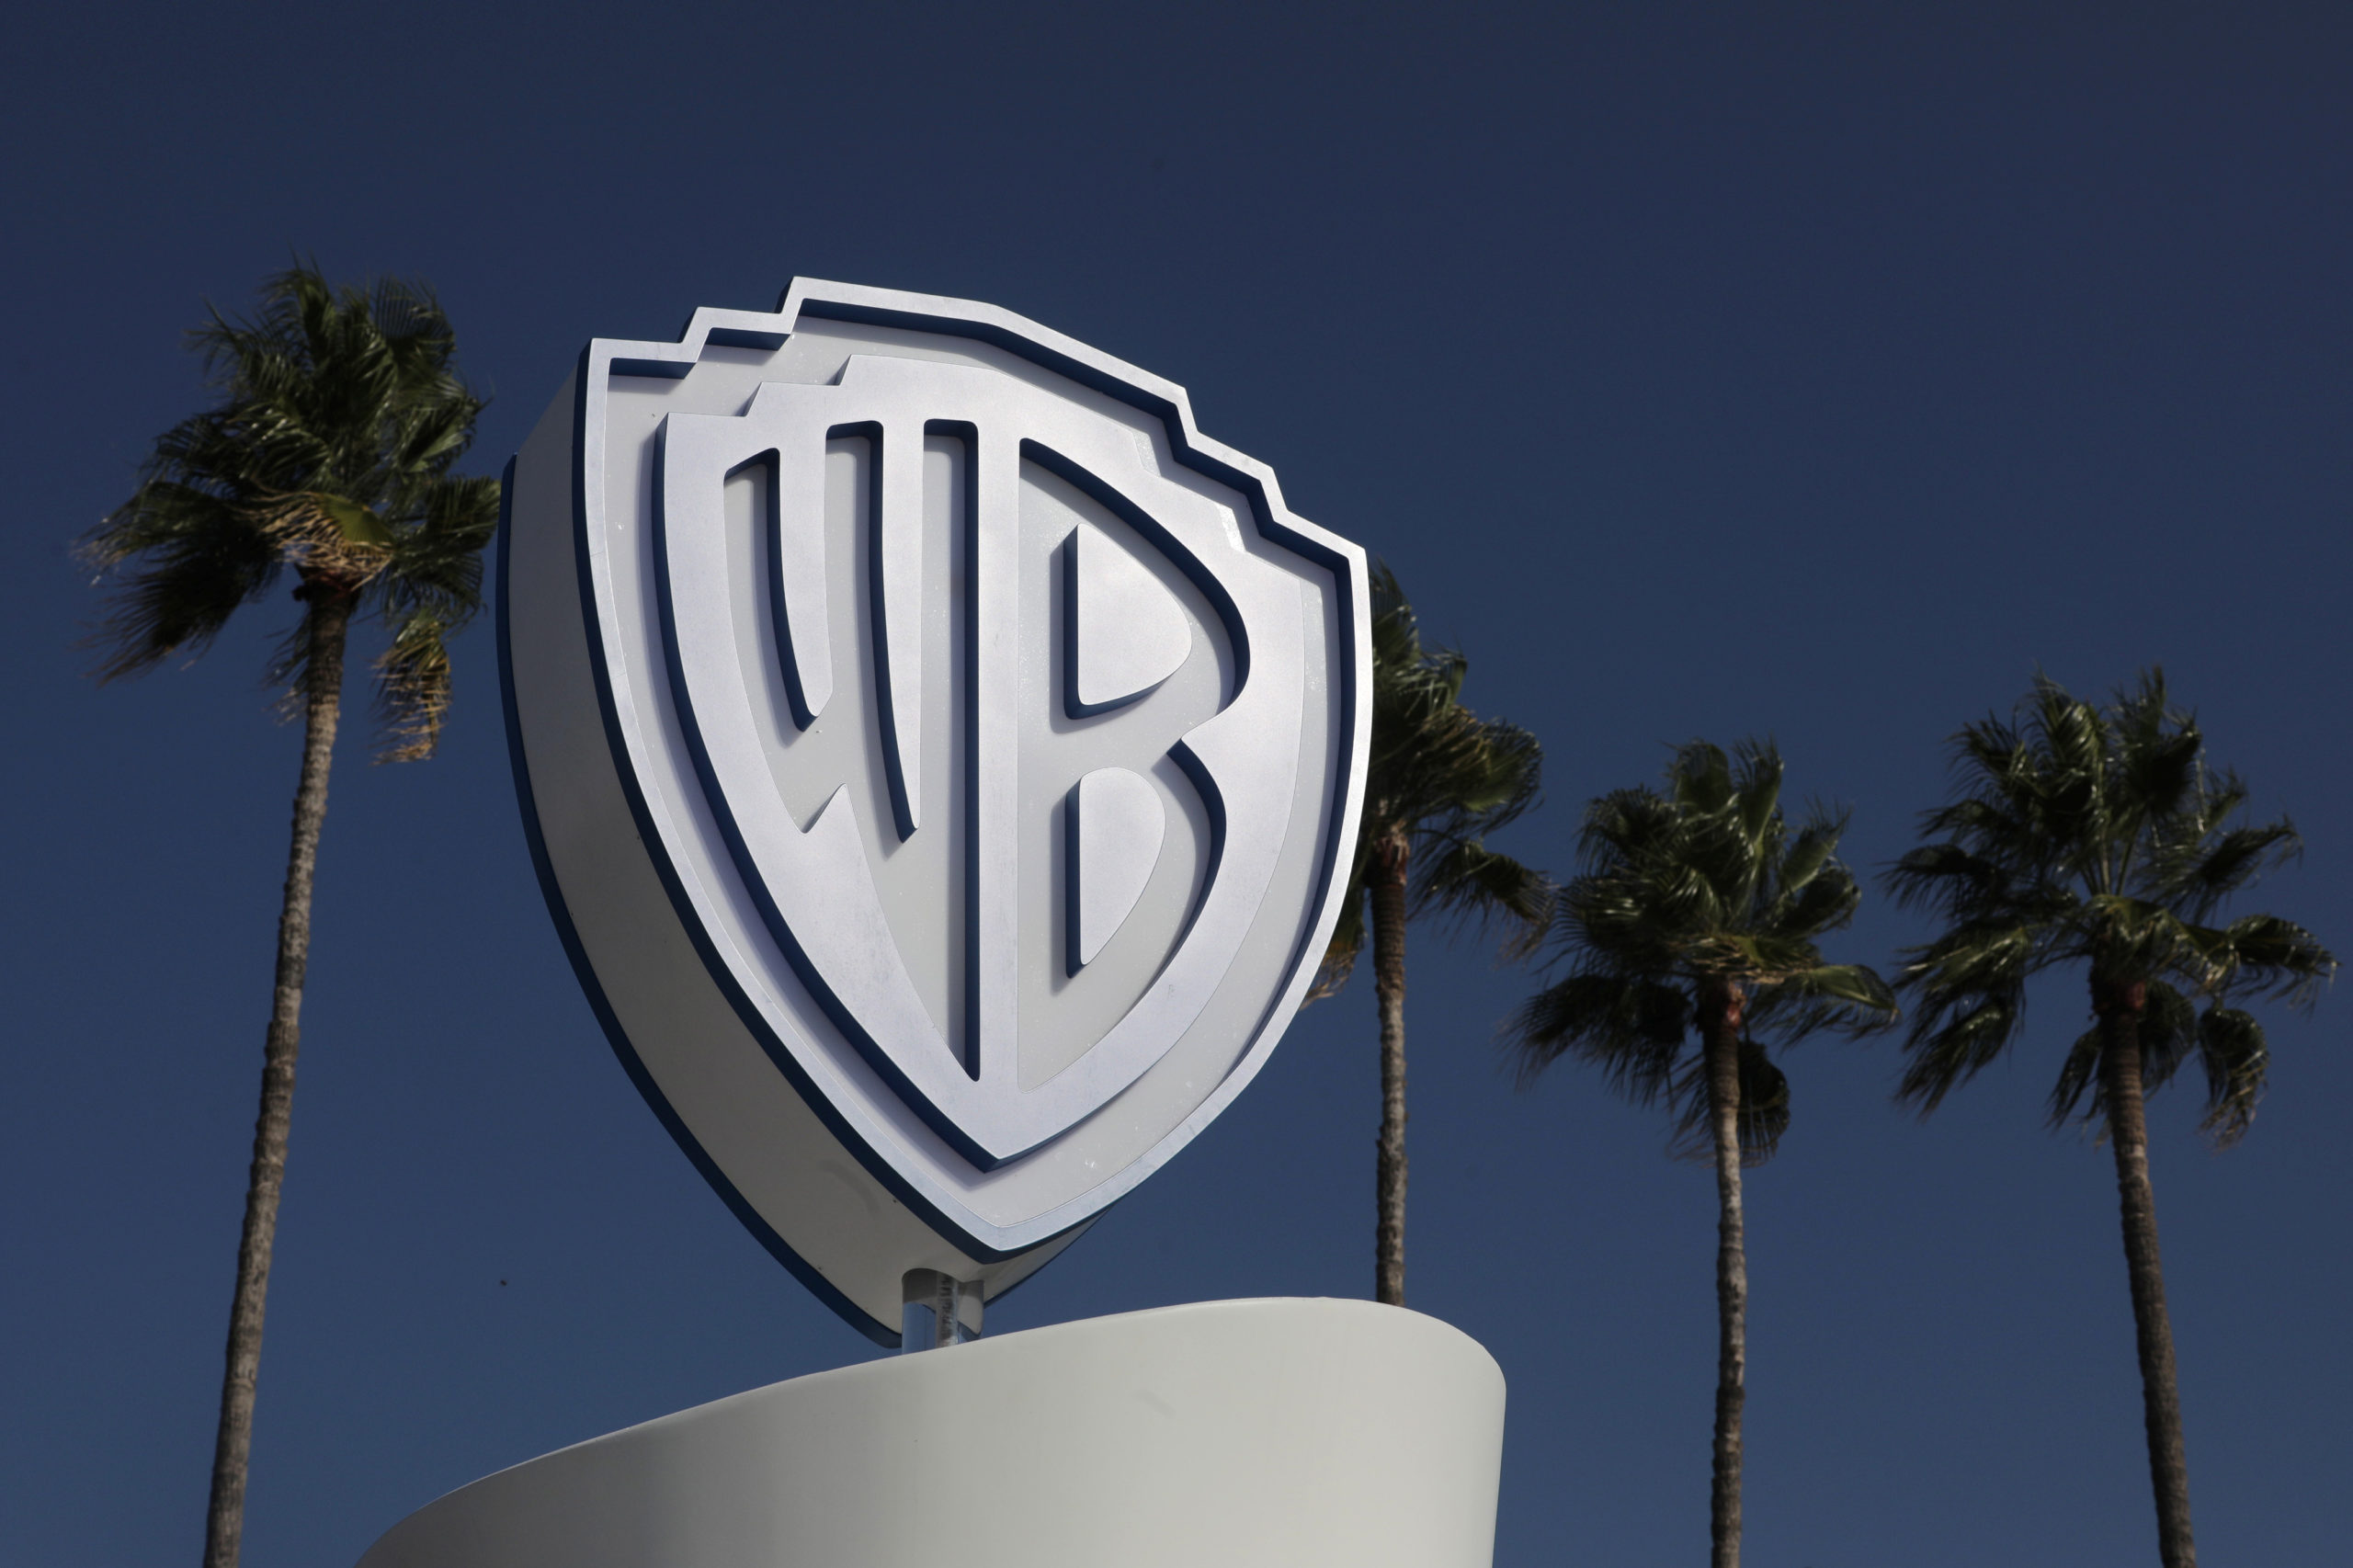 The Warner Bros logo is seen during the annual MIPCOM television programme market in Cannes, France, October 14, 2019. REUTERS/Eric Gaillard